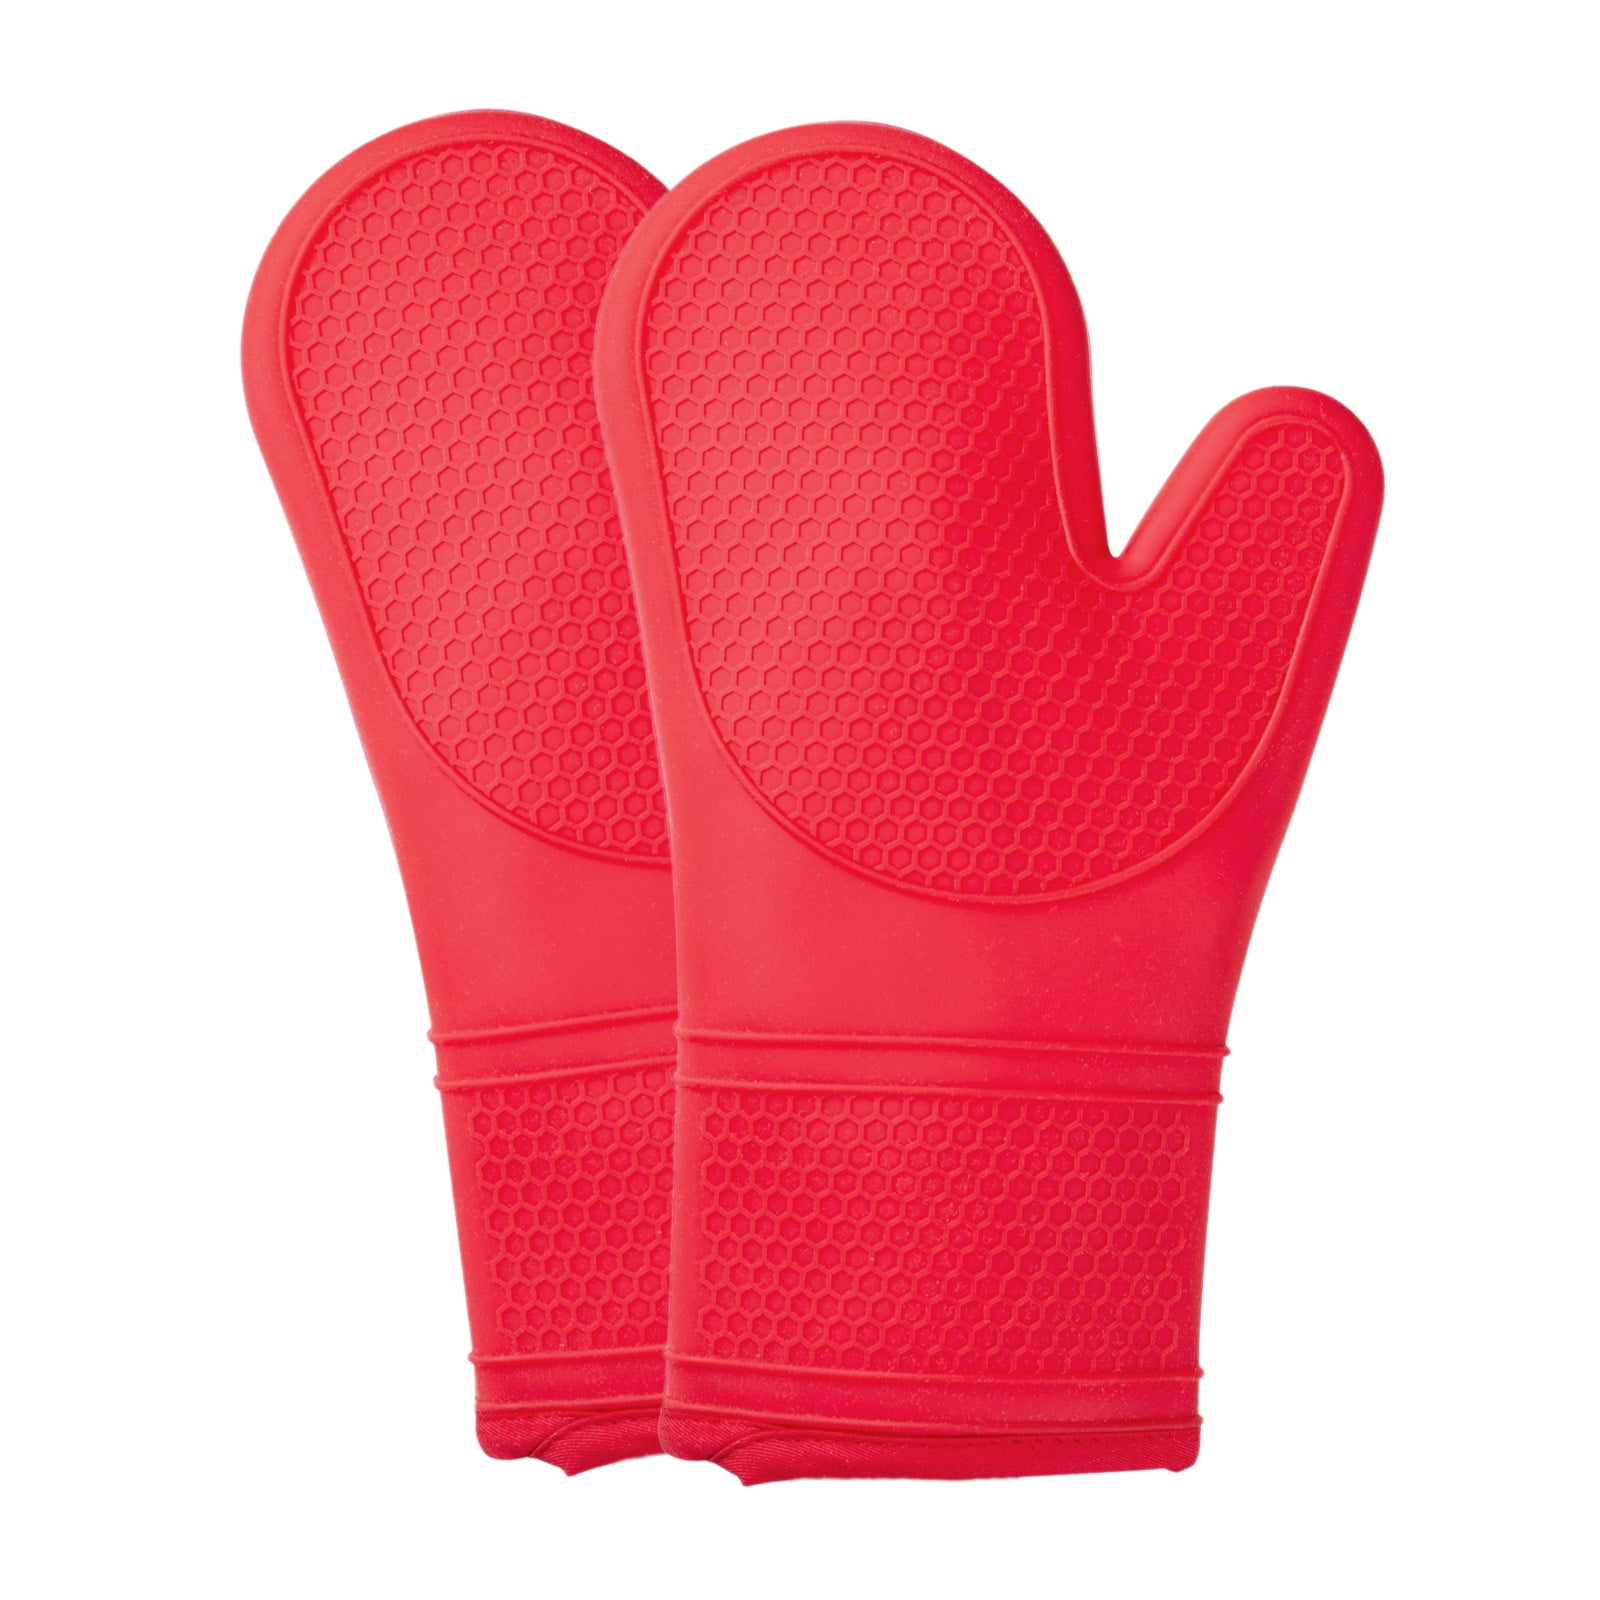 Yvnicll Silicone Oven Mitts Heat Resistant for Kitchen, Finger